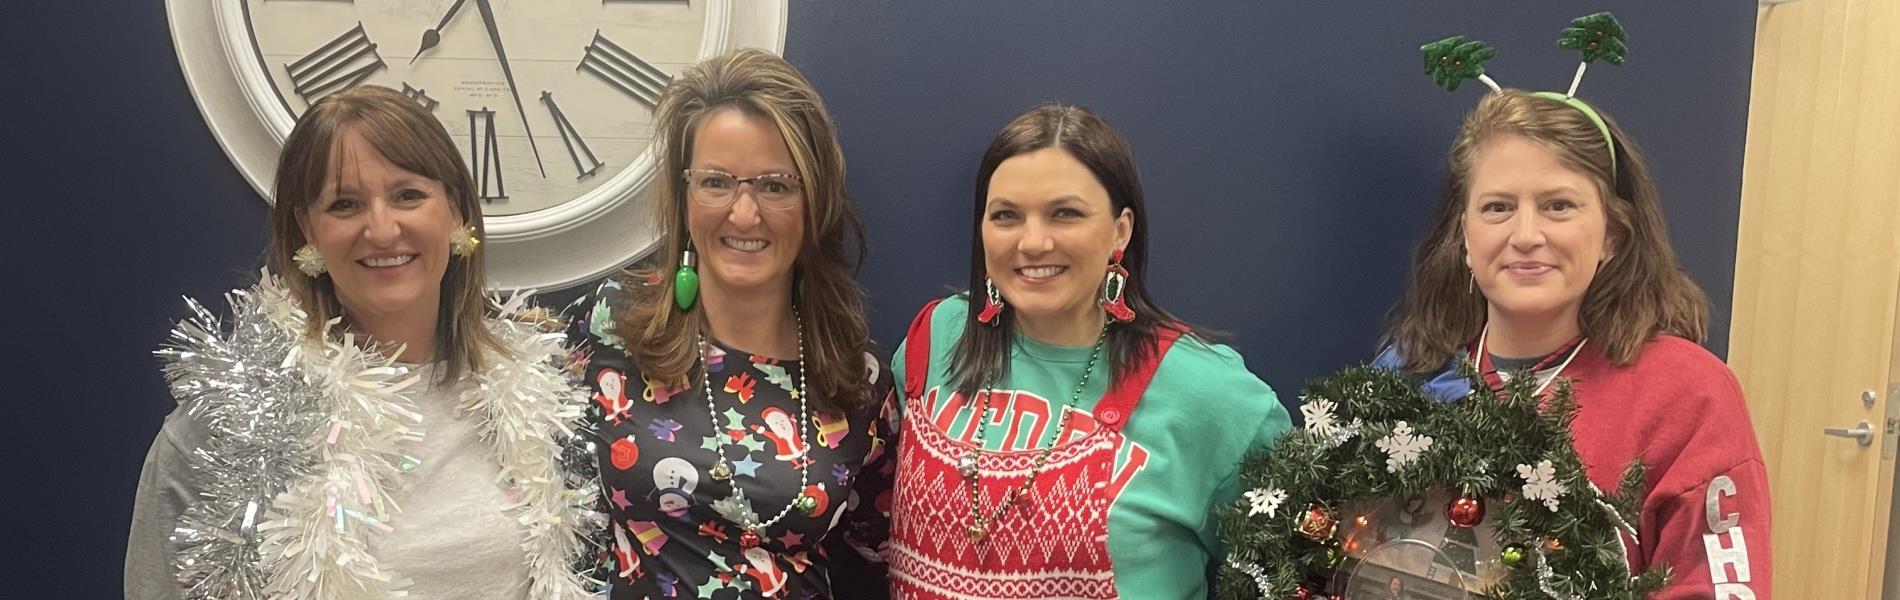 Office Ugly Christmas Sweater Contest